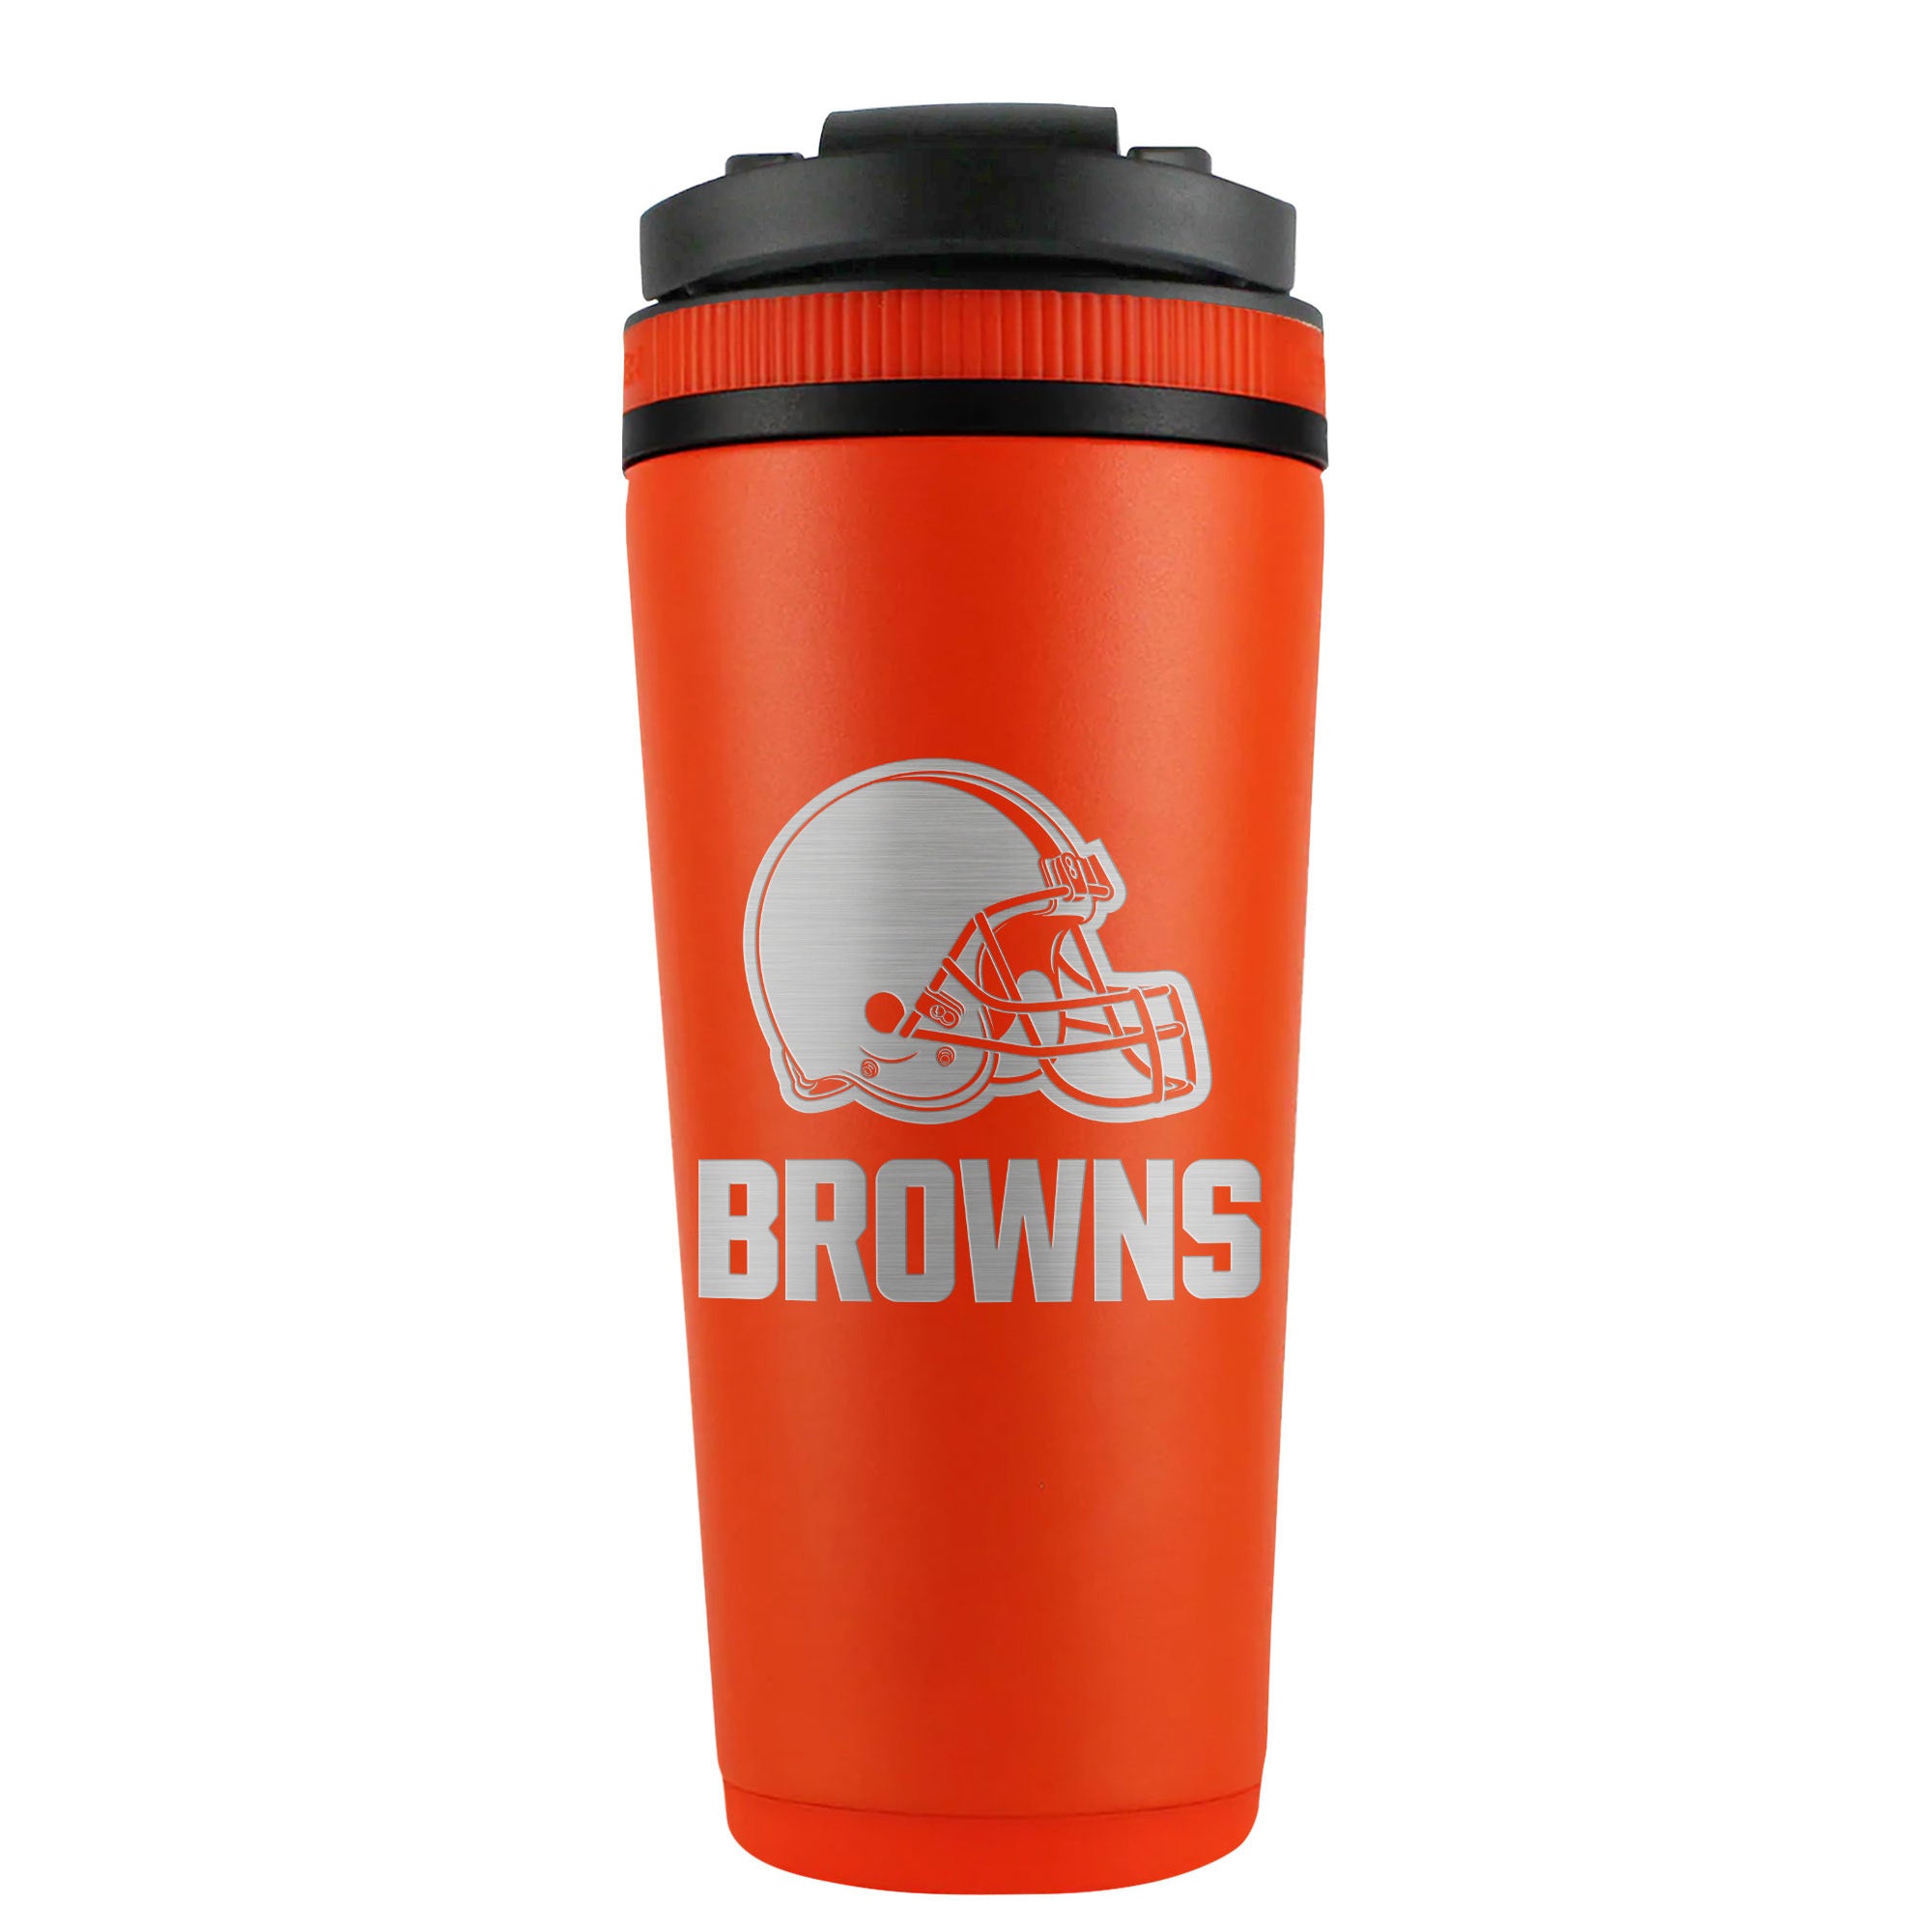 Officially Licensed Cleveland Browns 26oz Ice Shaker - Orange